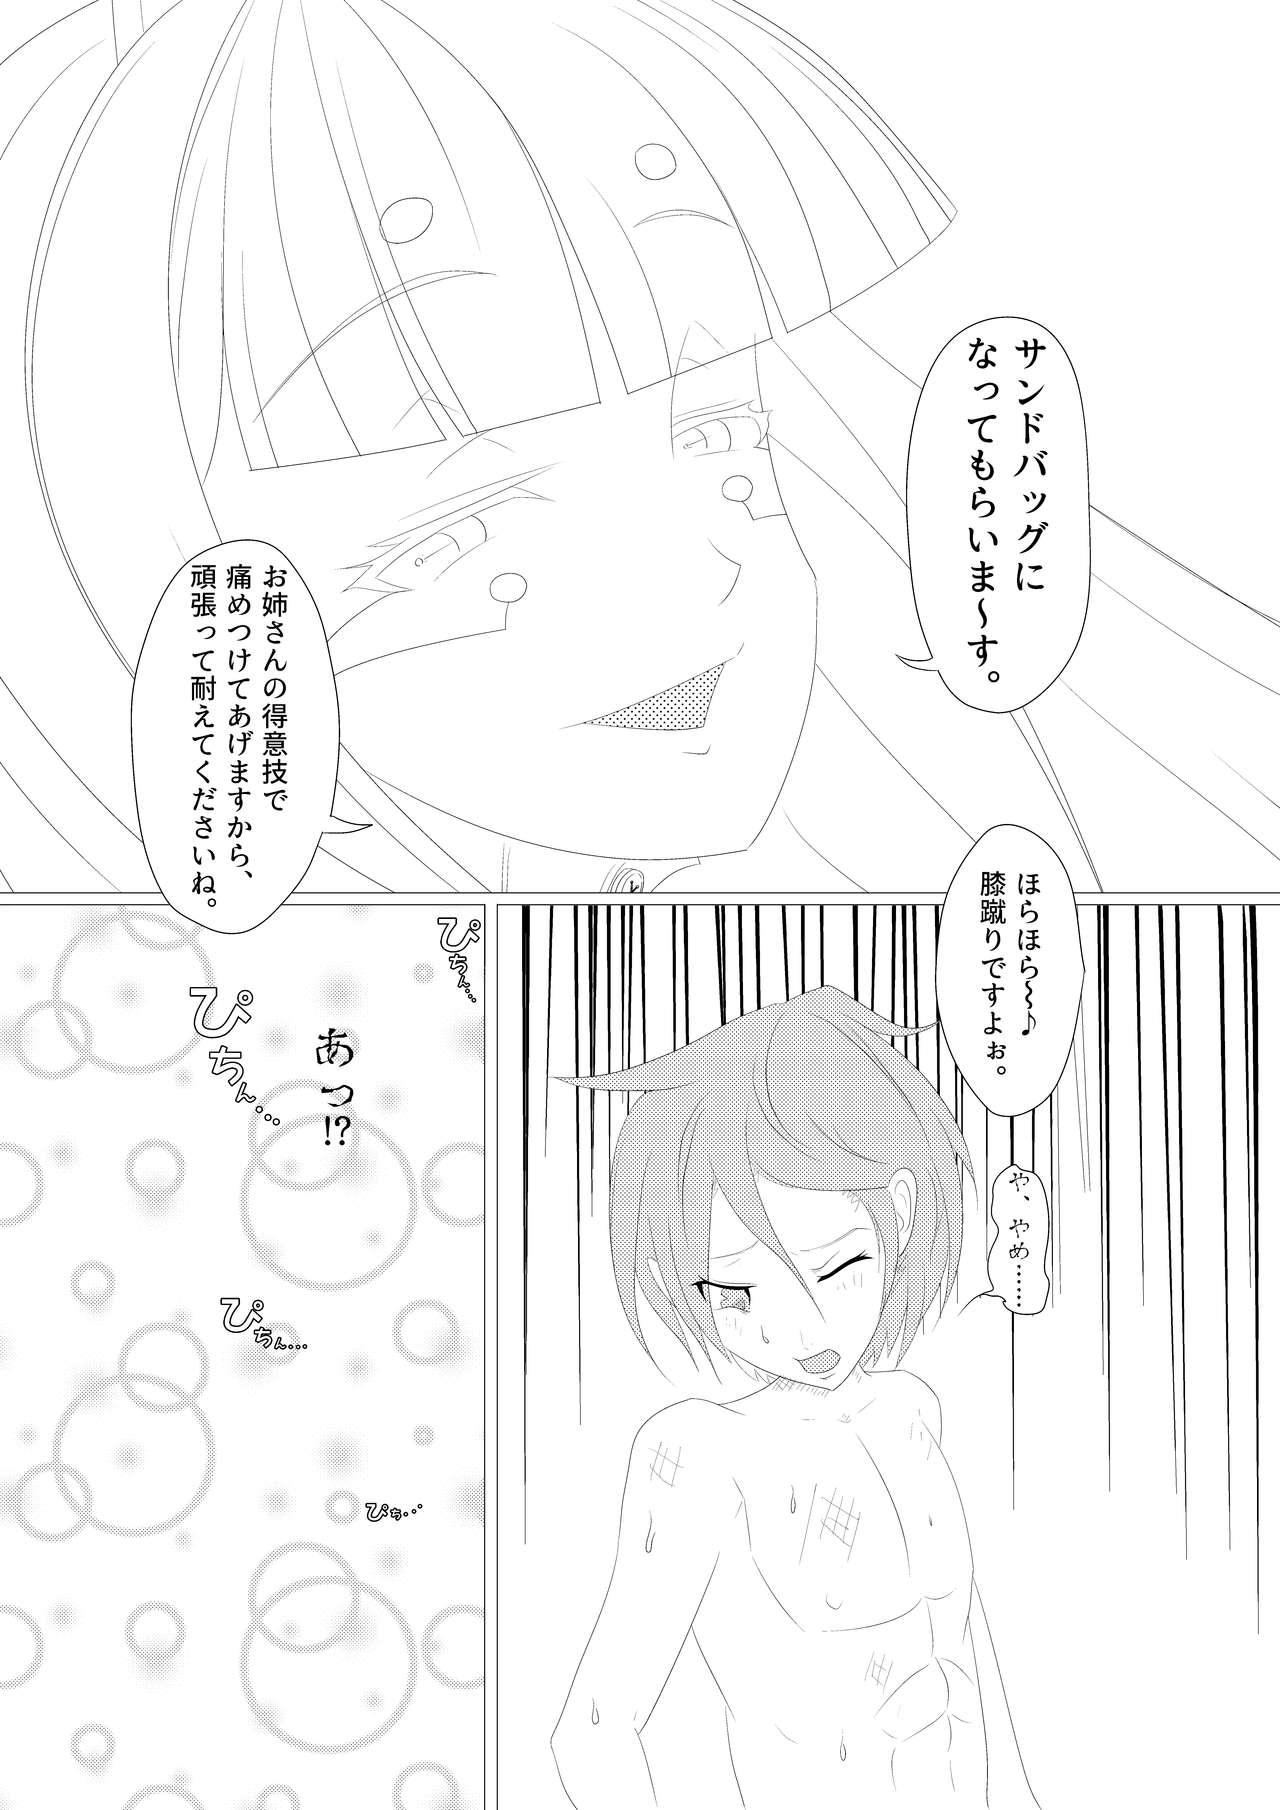 Amador 淫膝１９ページ（ほぼ線画） - Monster girl quest Masseuse - Page 13